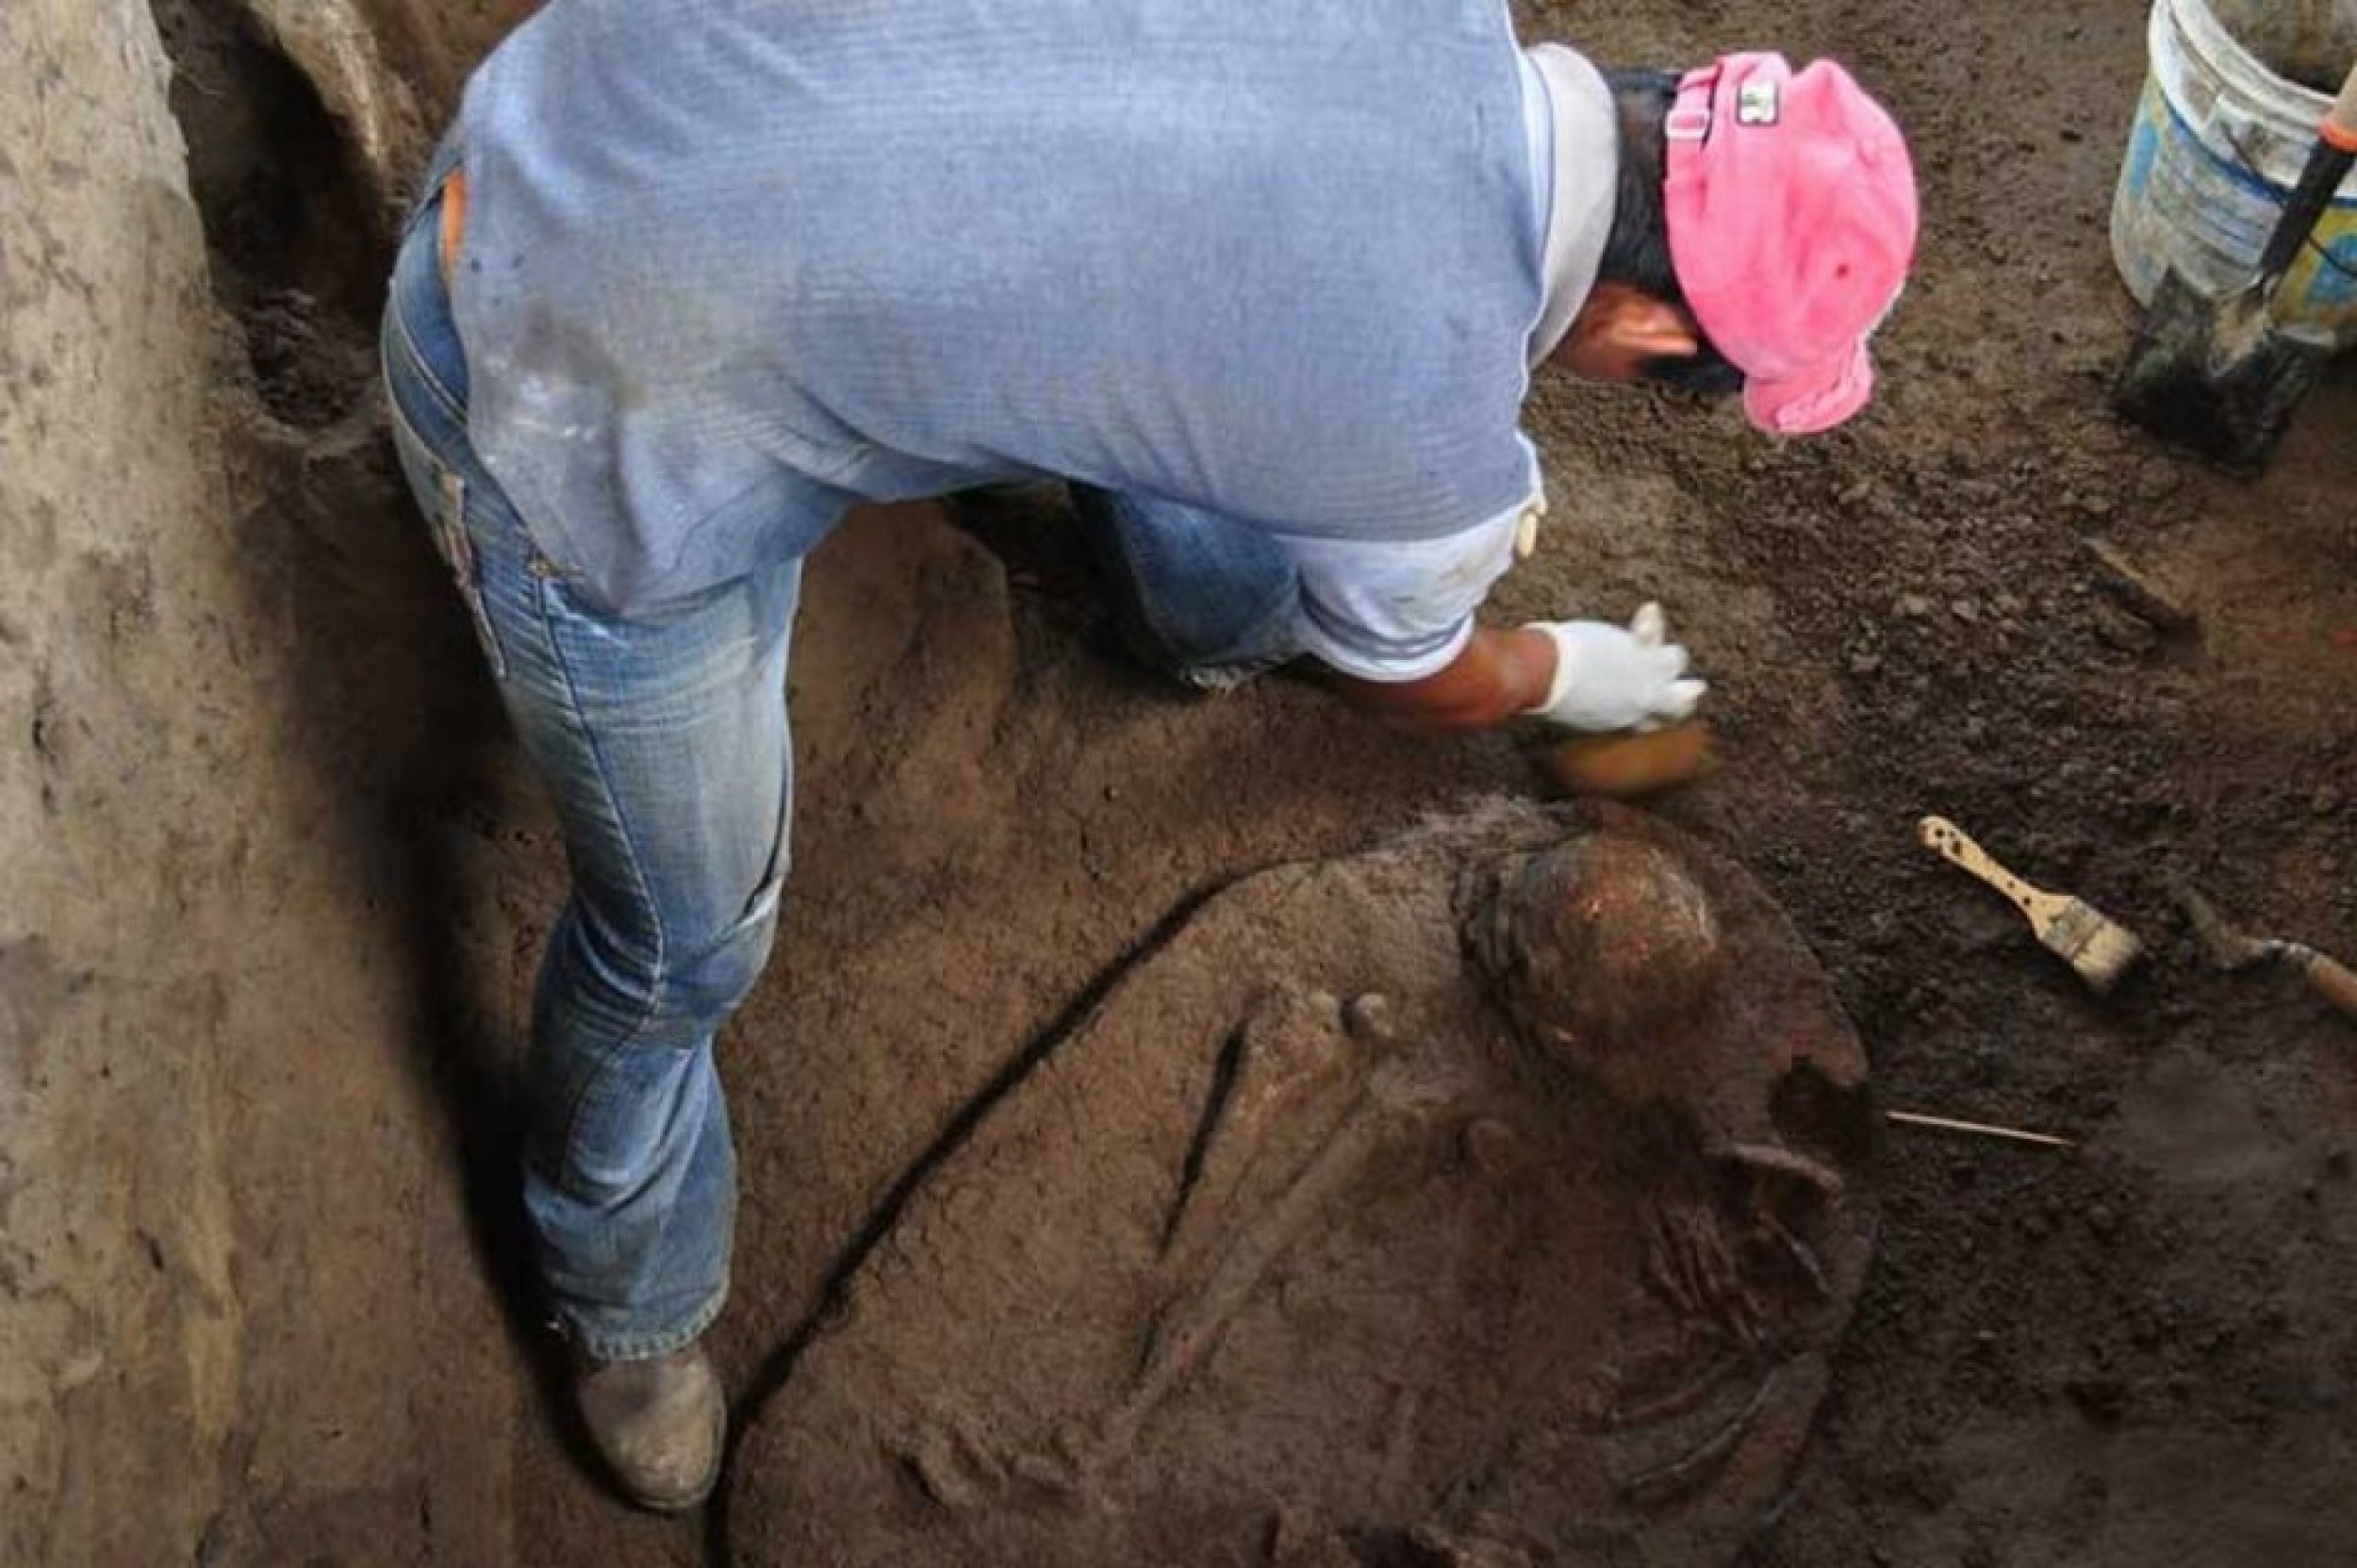 Archeologists discover hundreds of Mayan burials in Mexico PHOTOS.